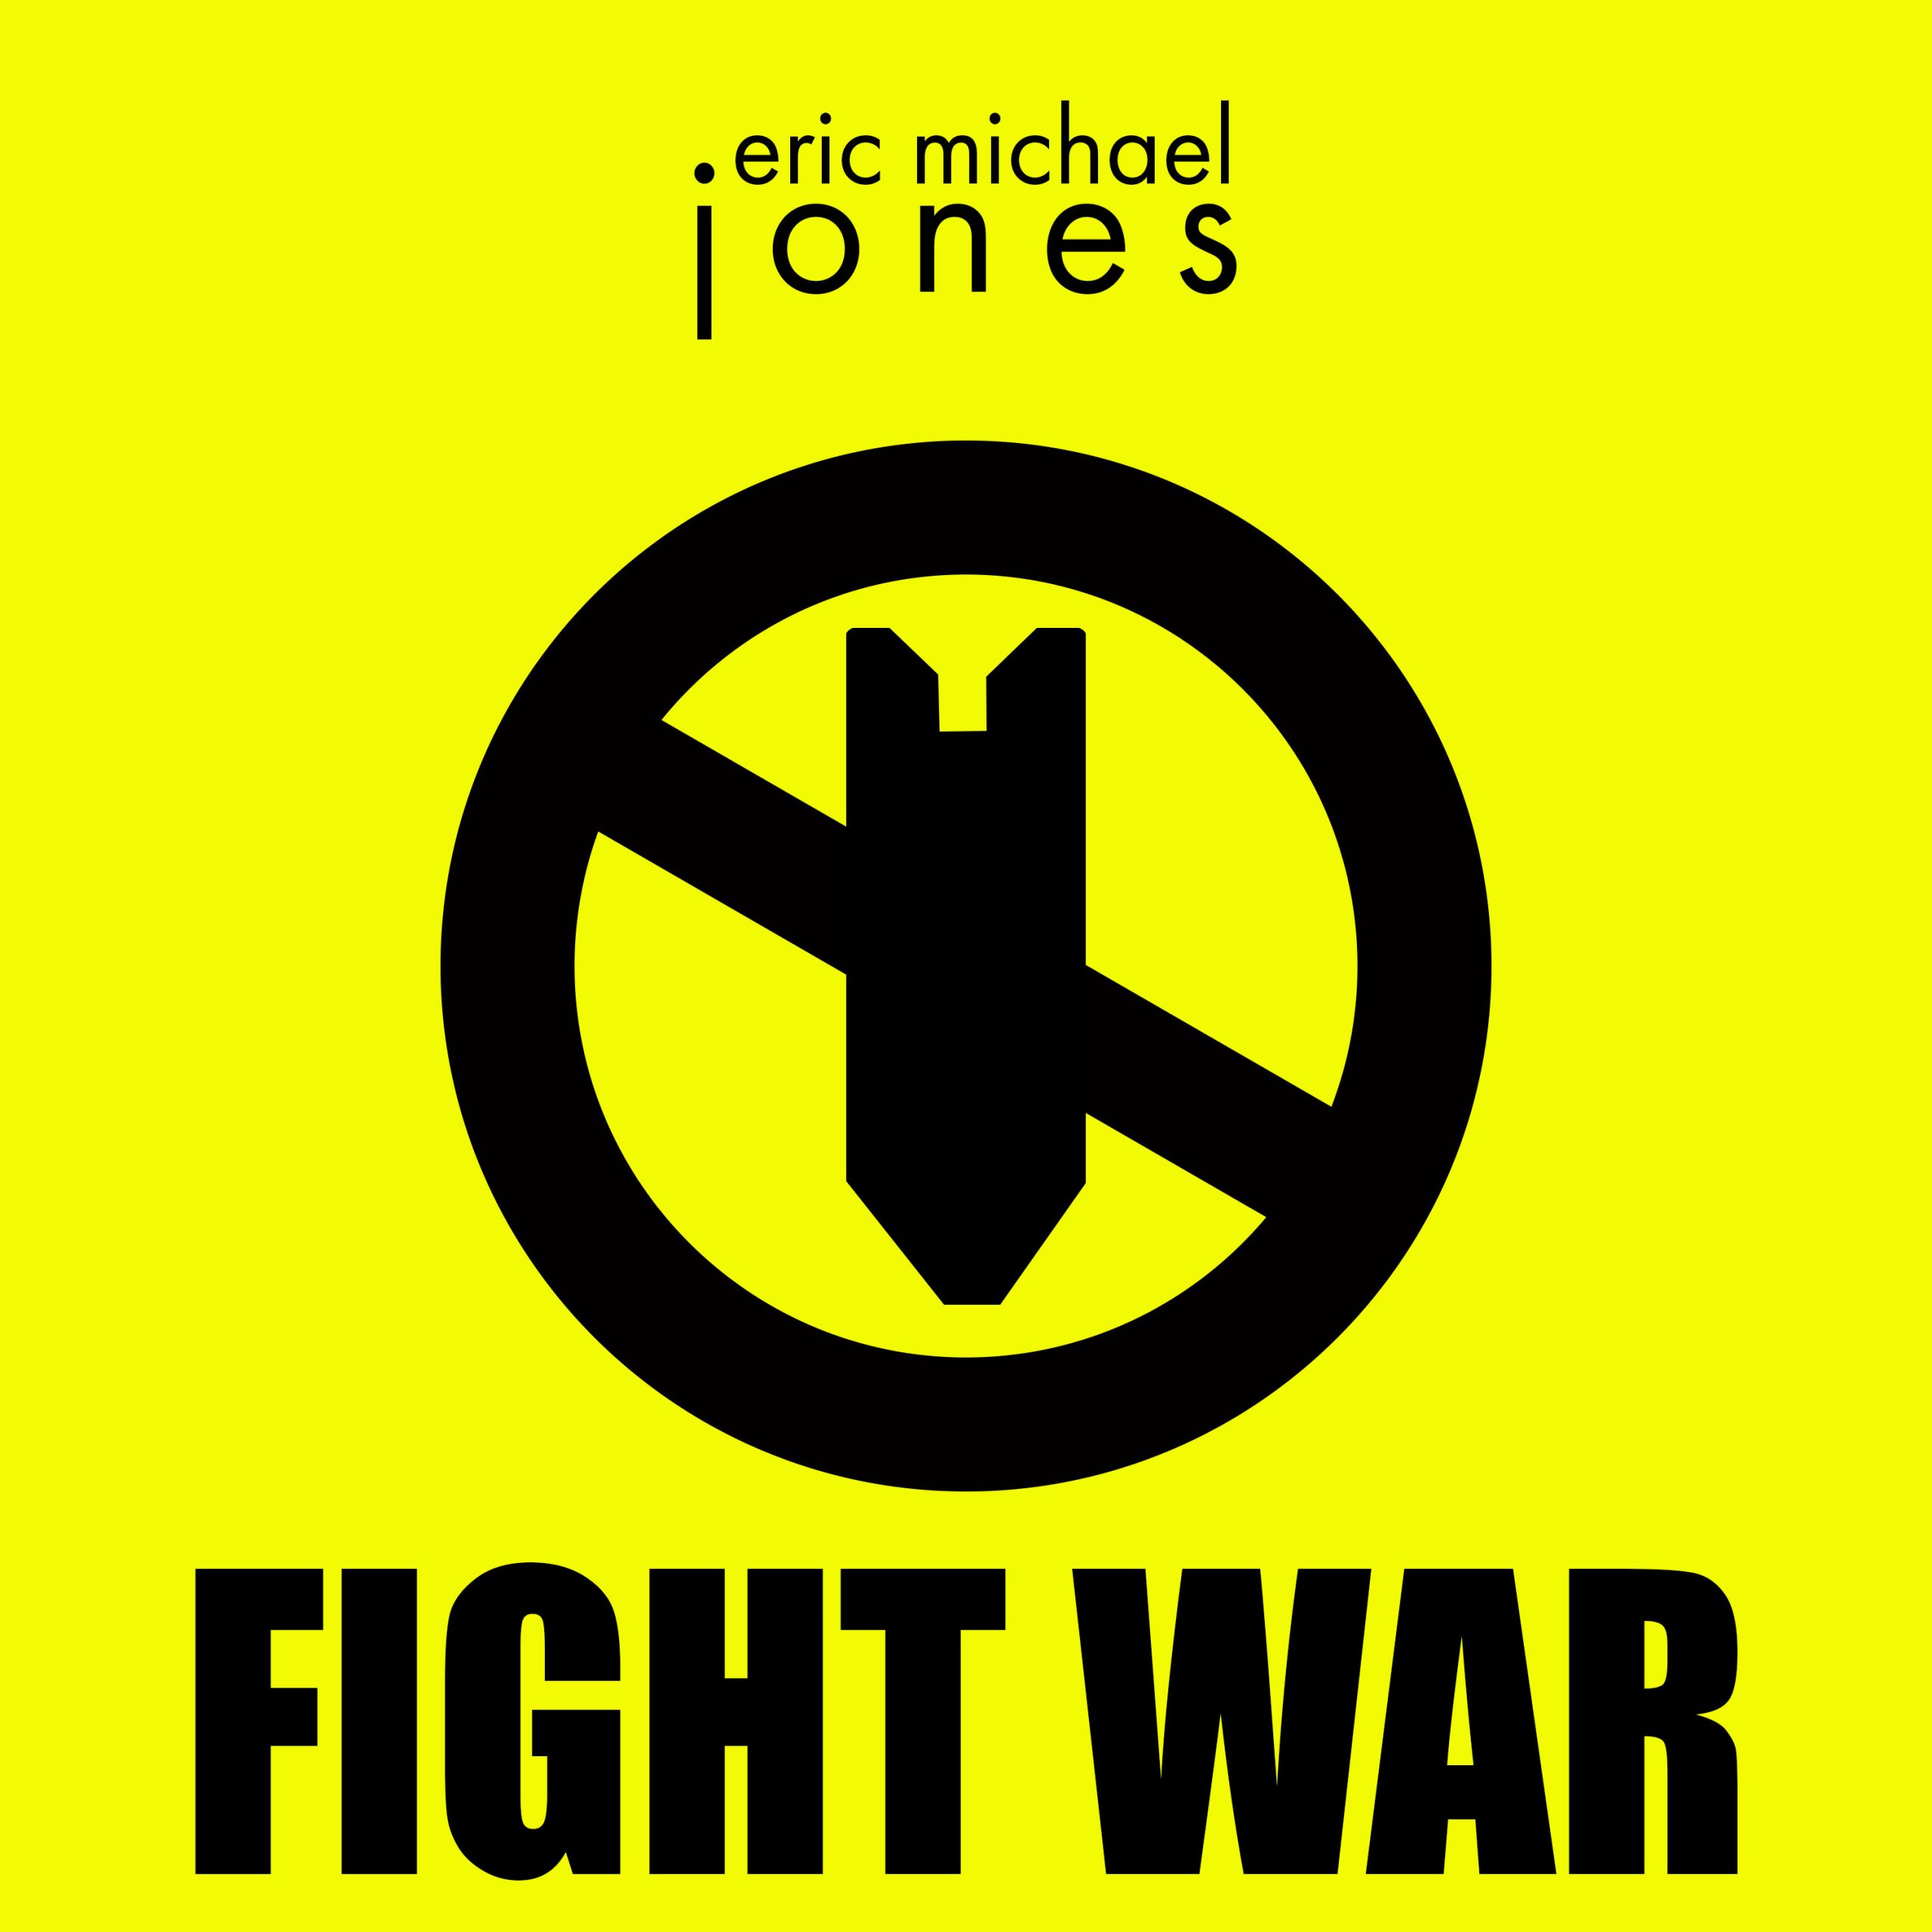 Cover art for Fight War showing a graphic "No Bombs" symbol